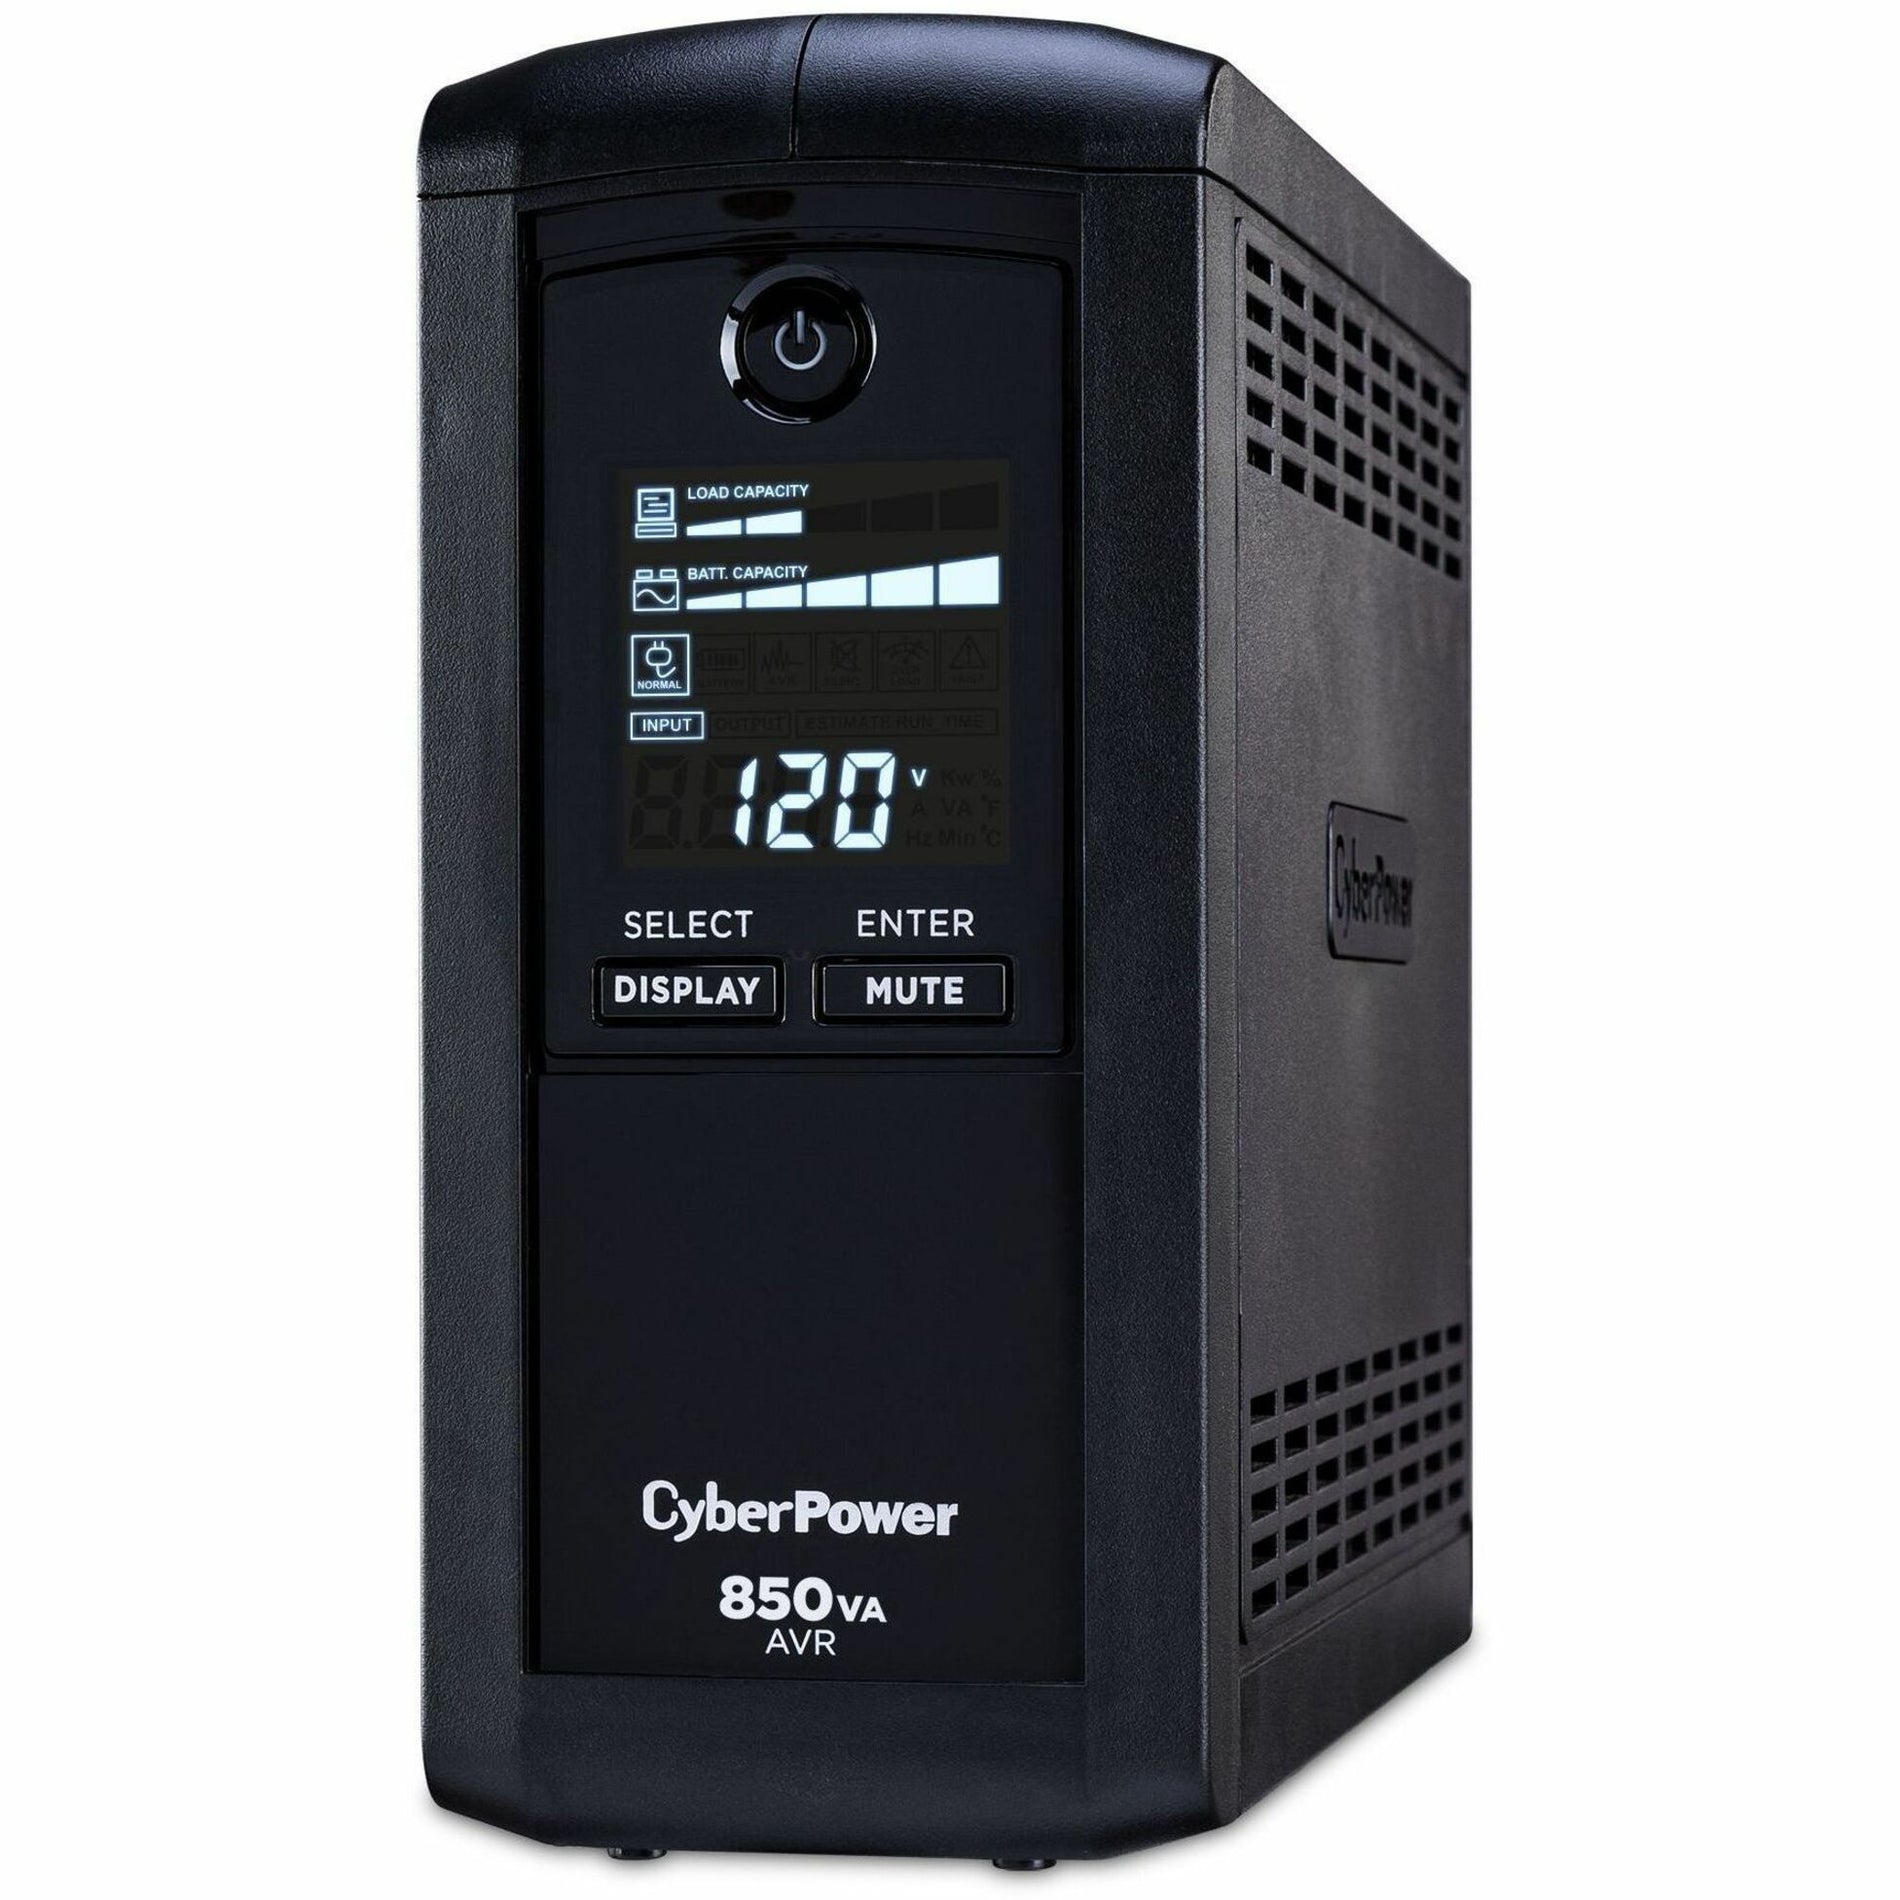 CyberPower CP850AVRLCD Intelligent LCD UPS Systems, 850 VA Tower UPS, 3 Year Warranty, Energy Star, USB and Serial Port